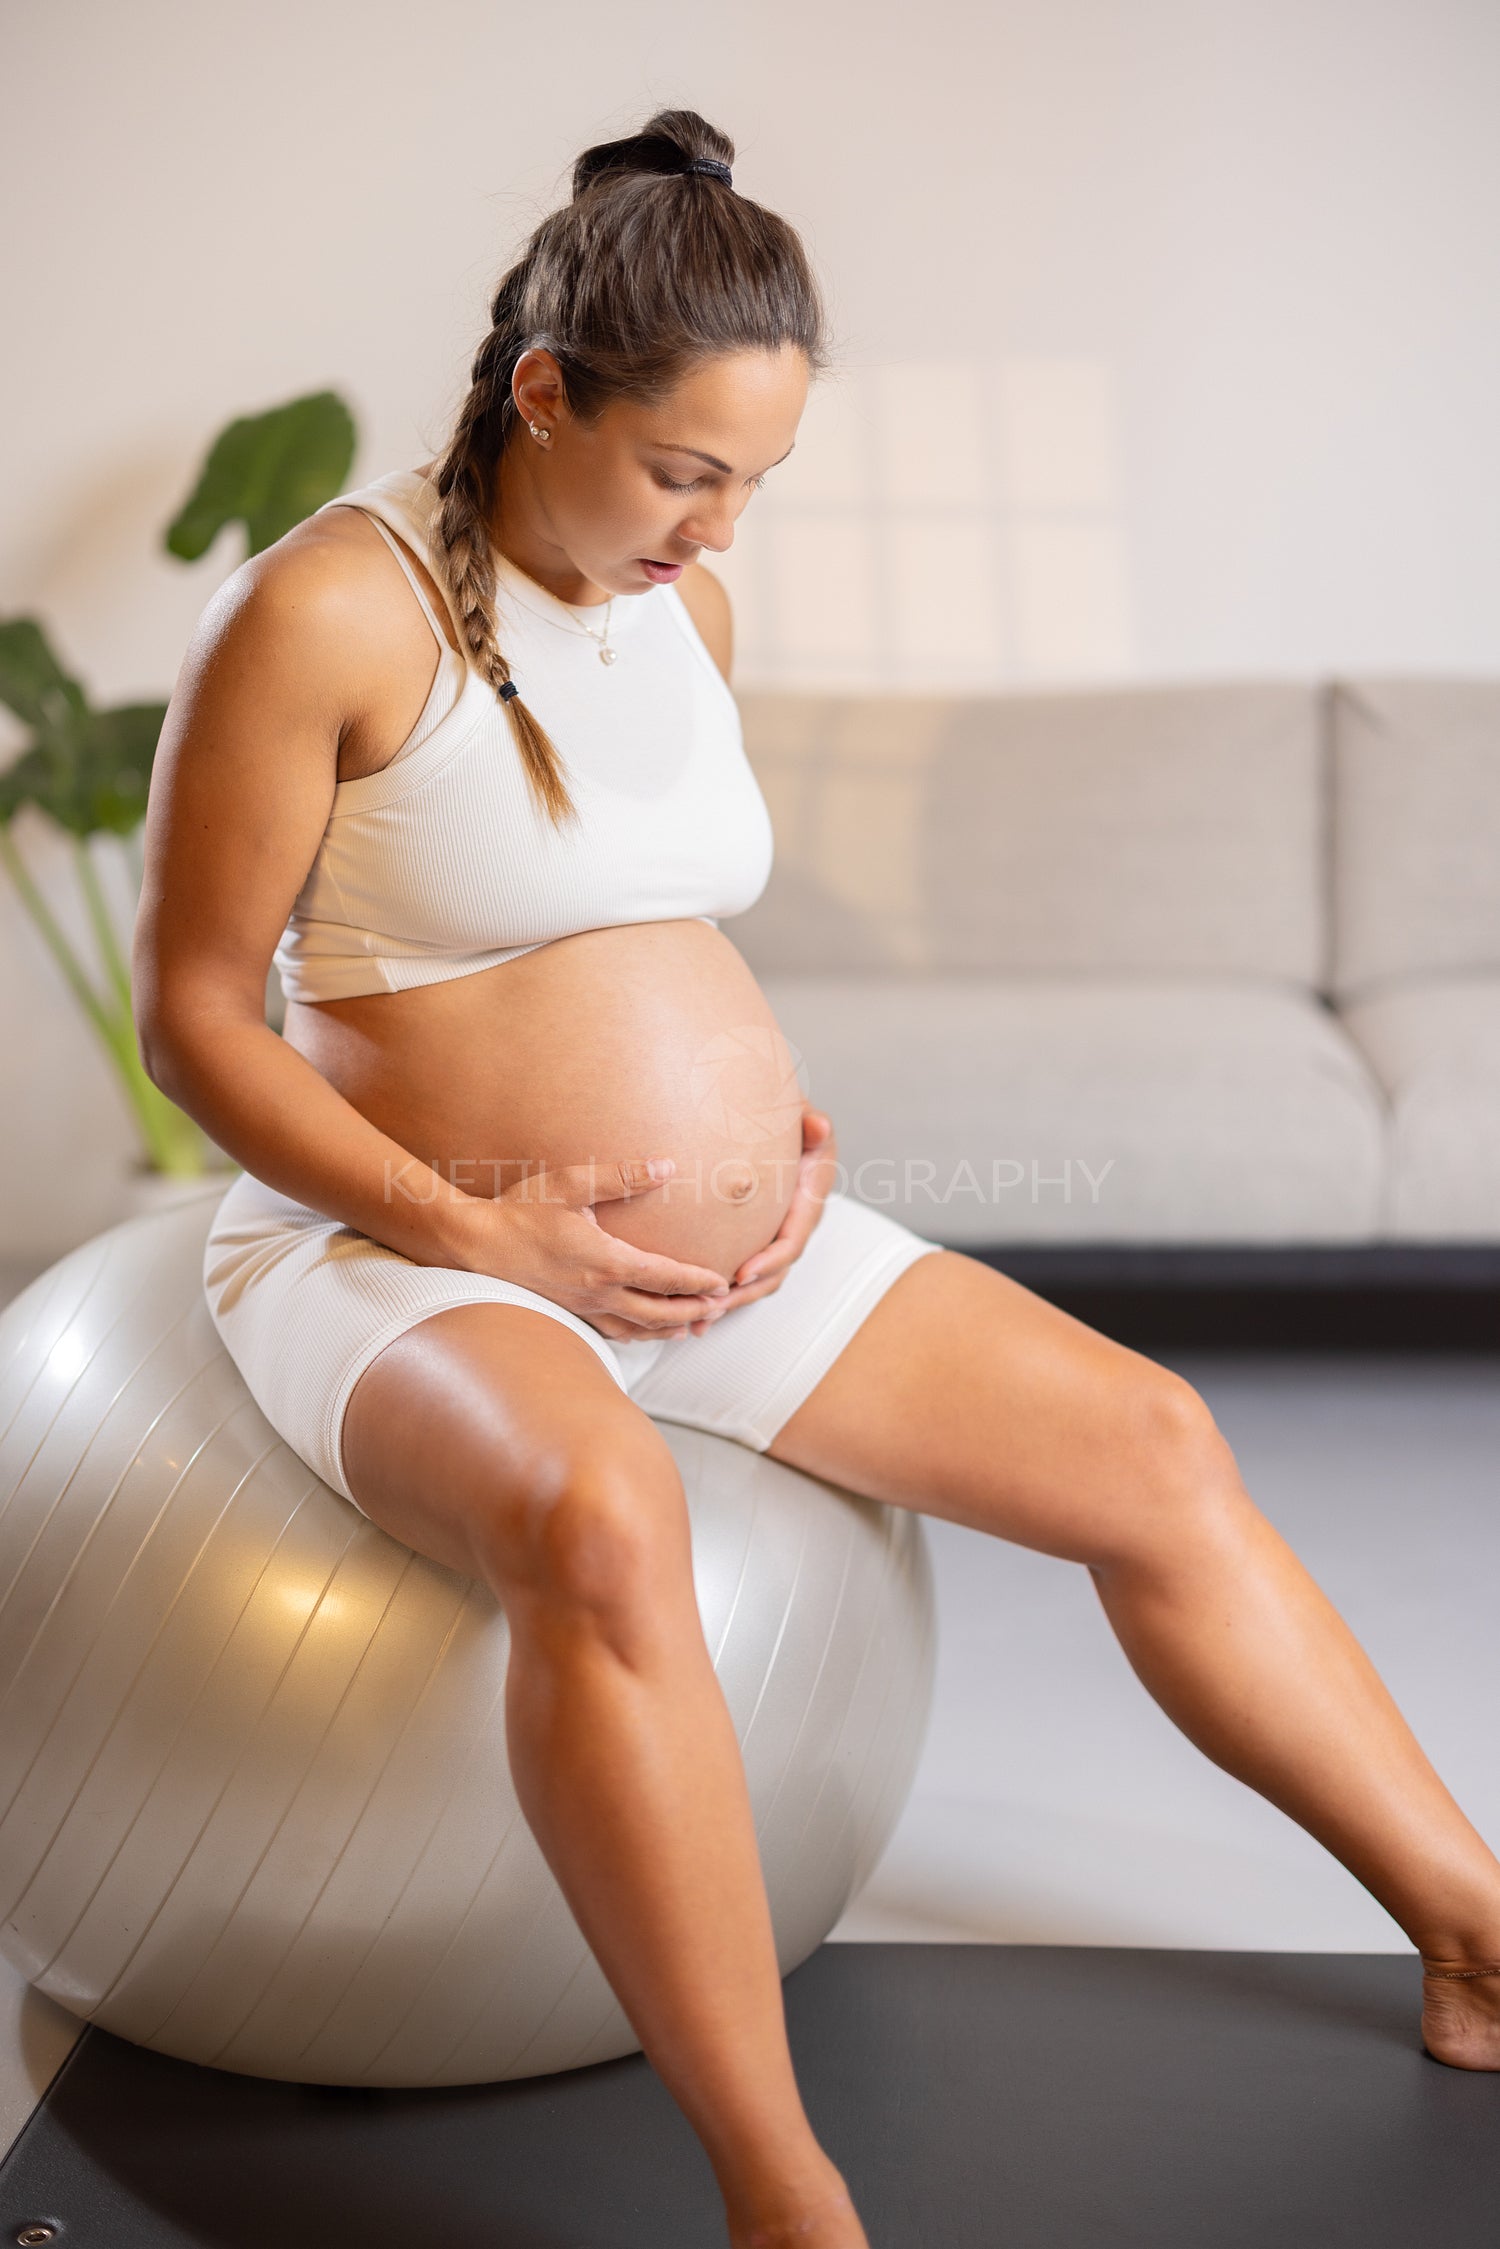 Expectant Mother Engages in Indoor Exercise at Home for Personal Wellbeing